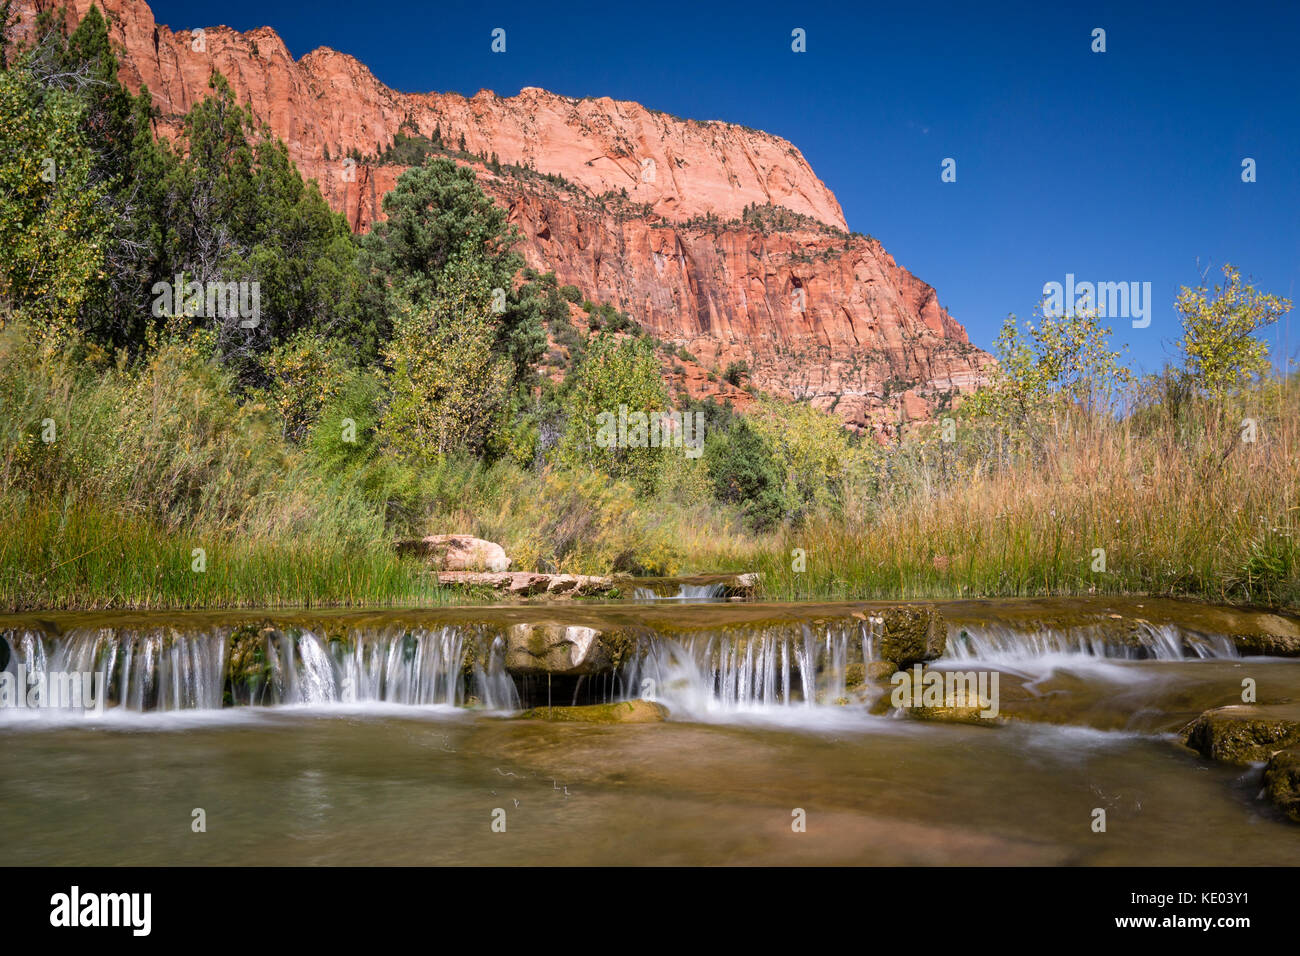 The La Verkin Creek Trail is in the Kolob Canyons area of Zion National Park. Stock Photo